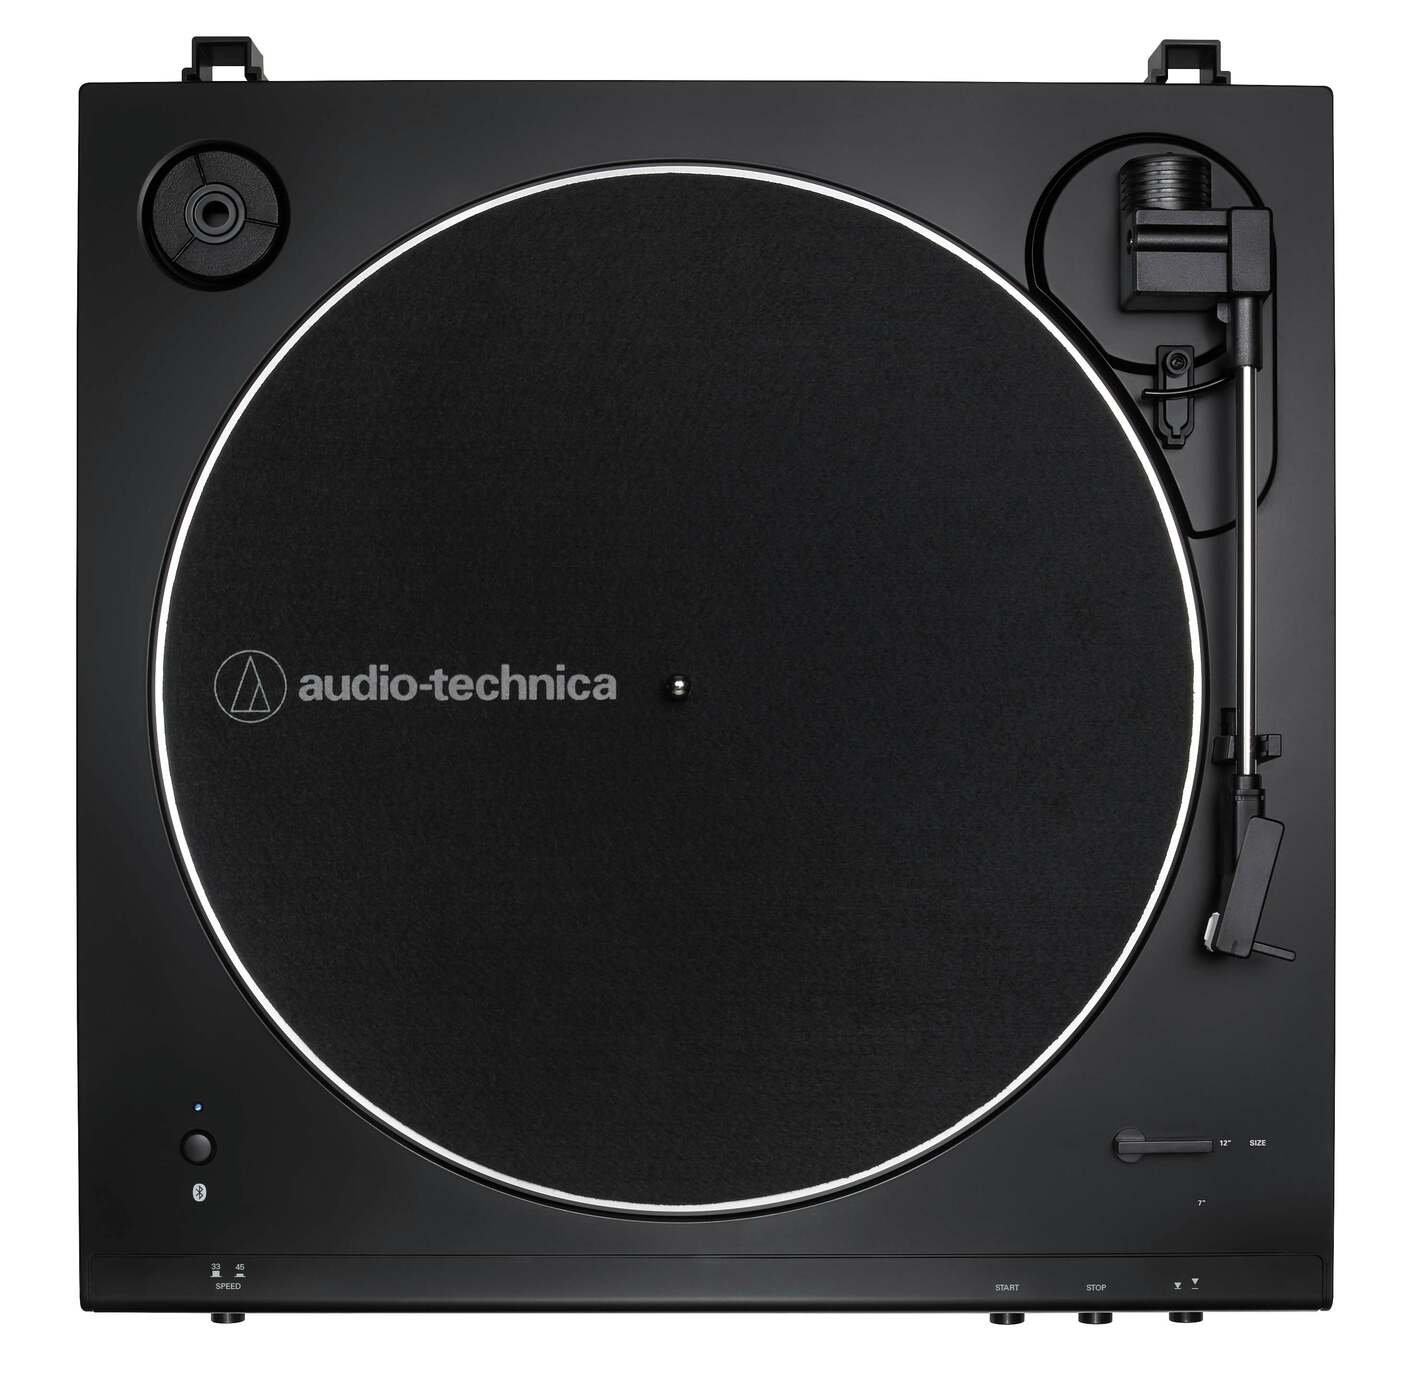 Audio-Technica AT-LP60XBTBK Wireless Belt-Drive Turntable Review